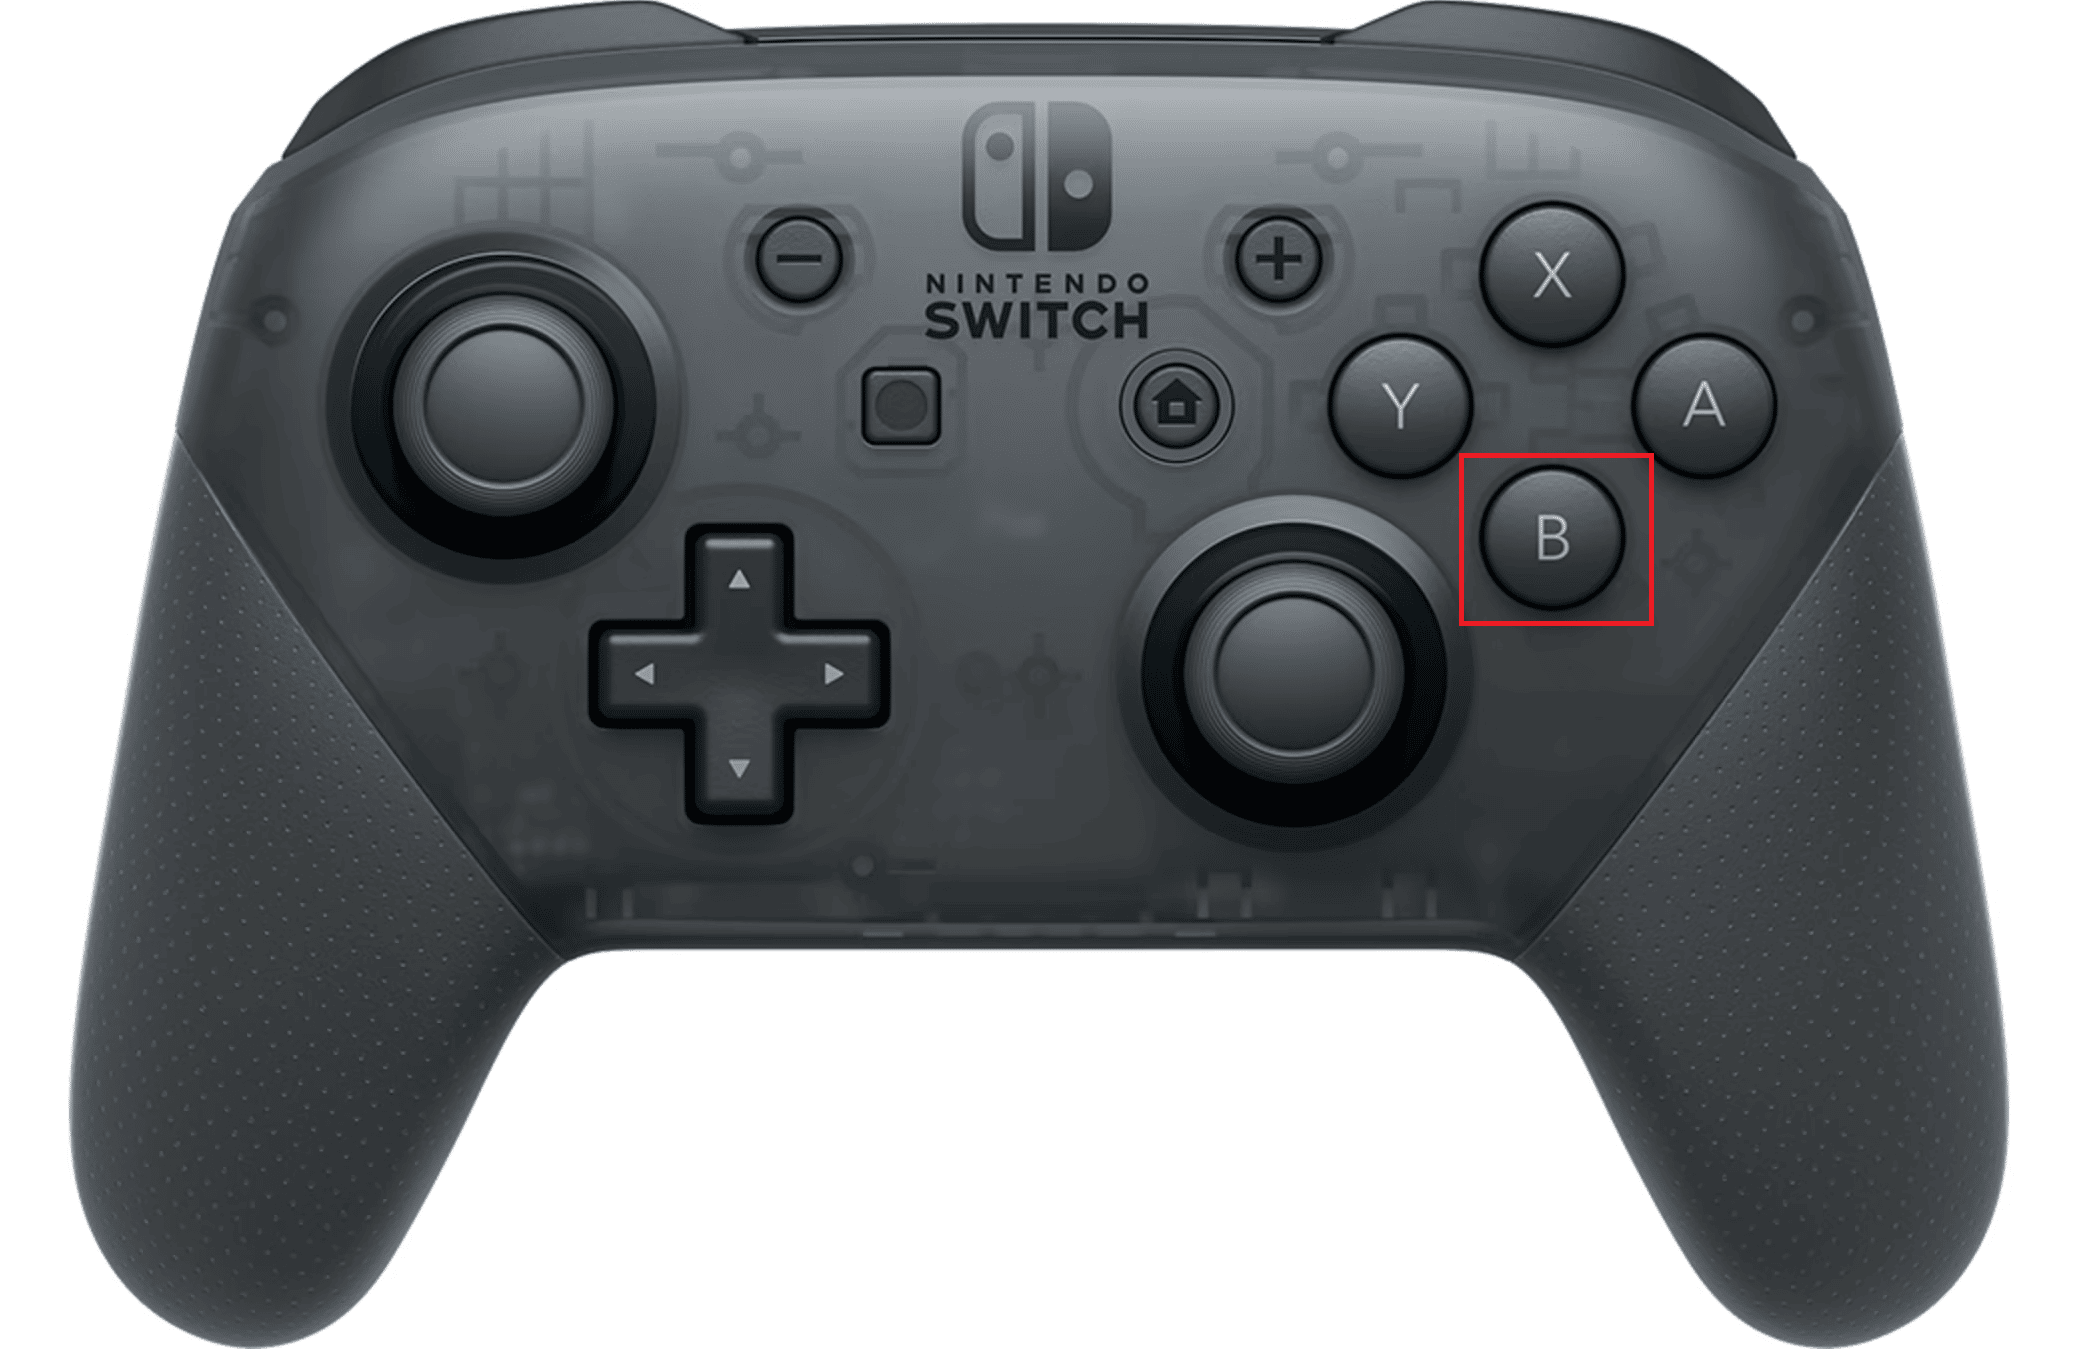 Press the B button on your Nintendo Switch Pro controller to toggle to the SITTING OUT status | switch to spectate in Fortnite creative